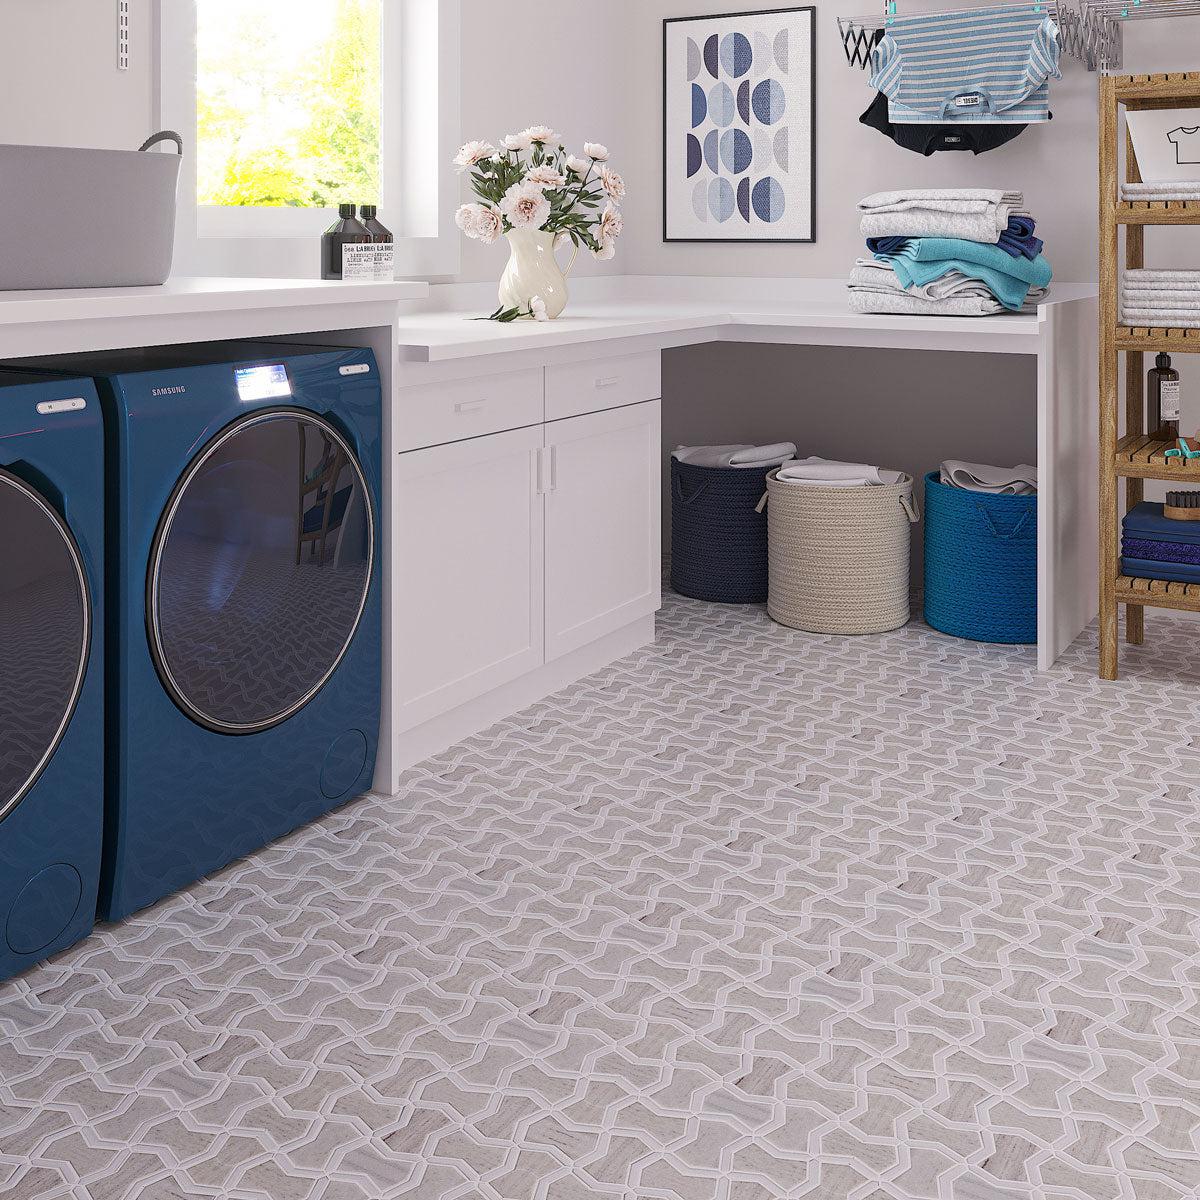 Marble laundry room floor with Sand Valley mosaic tile to add neutral color to blue appliances